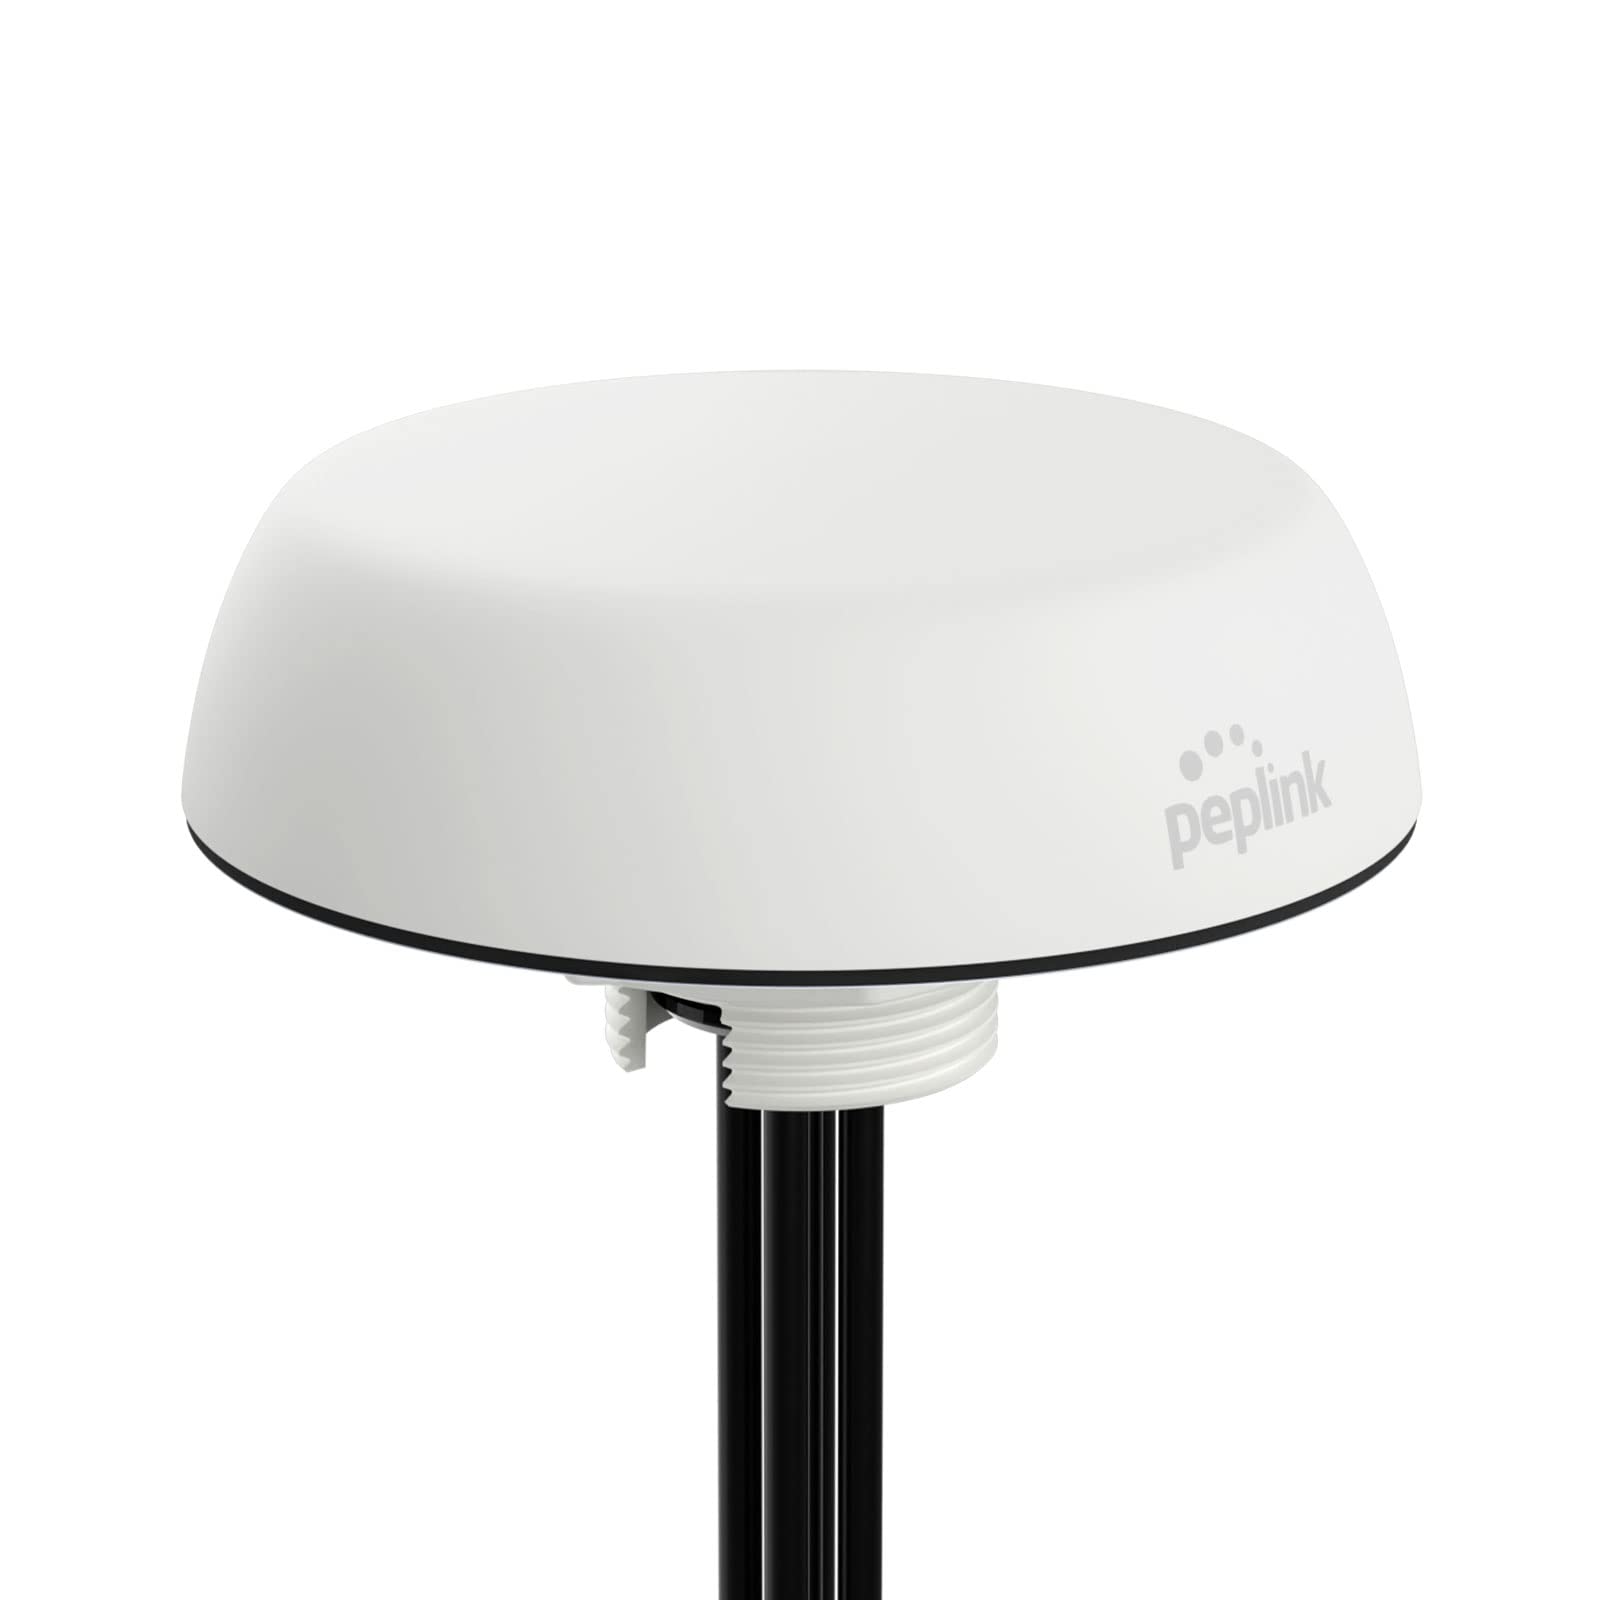 Peplink Mobility 22G, 5 in 1 Cellular and Wi-Fi Antenna System with GPS Receiver, QMA, 1ft/0.3m, White | ANT-MB-22G-Q-W-1